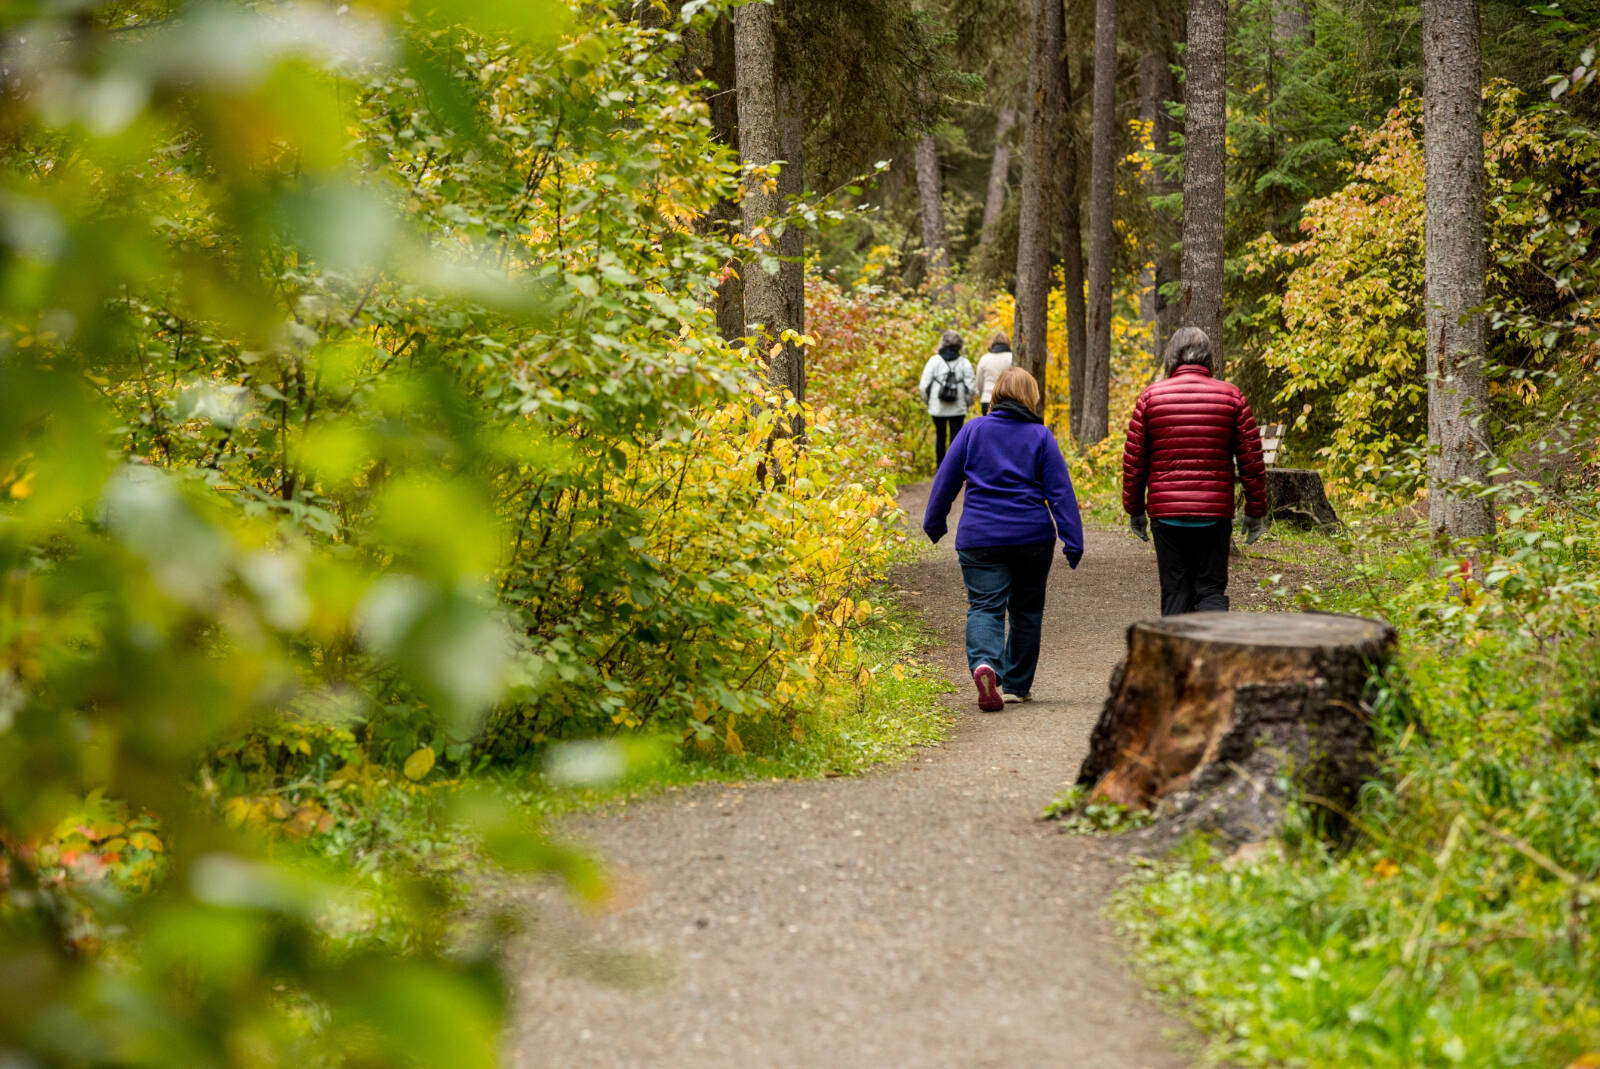 100 Mile House trail. Whether you prefer hiking forest trails or mountain meadows, youll find in the Cariboo! Photo courtesy Explore Cariboo